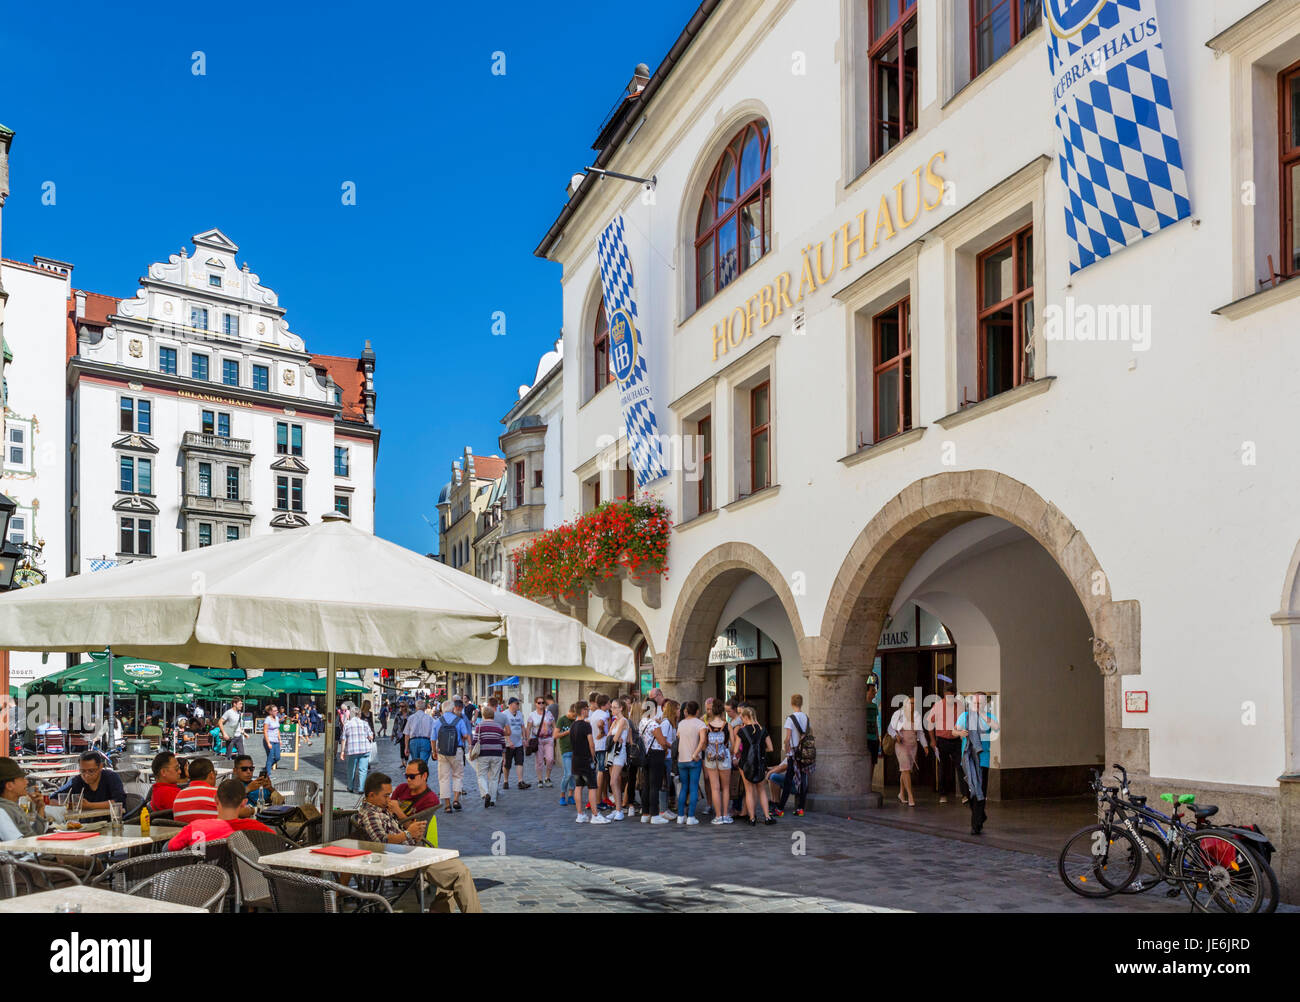 Restaurants and cafes in Platzl with the famous Hofbrauhaus to the right, Munich, Bavaria, Germany Stock Photo